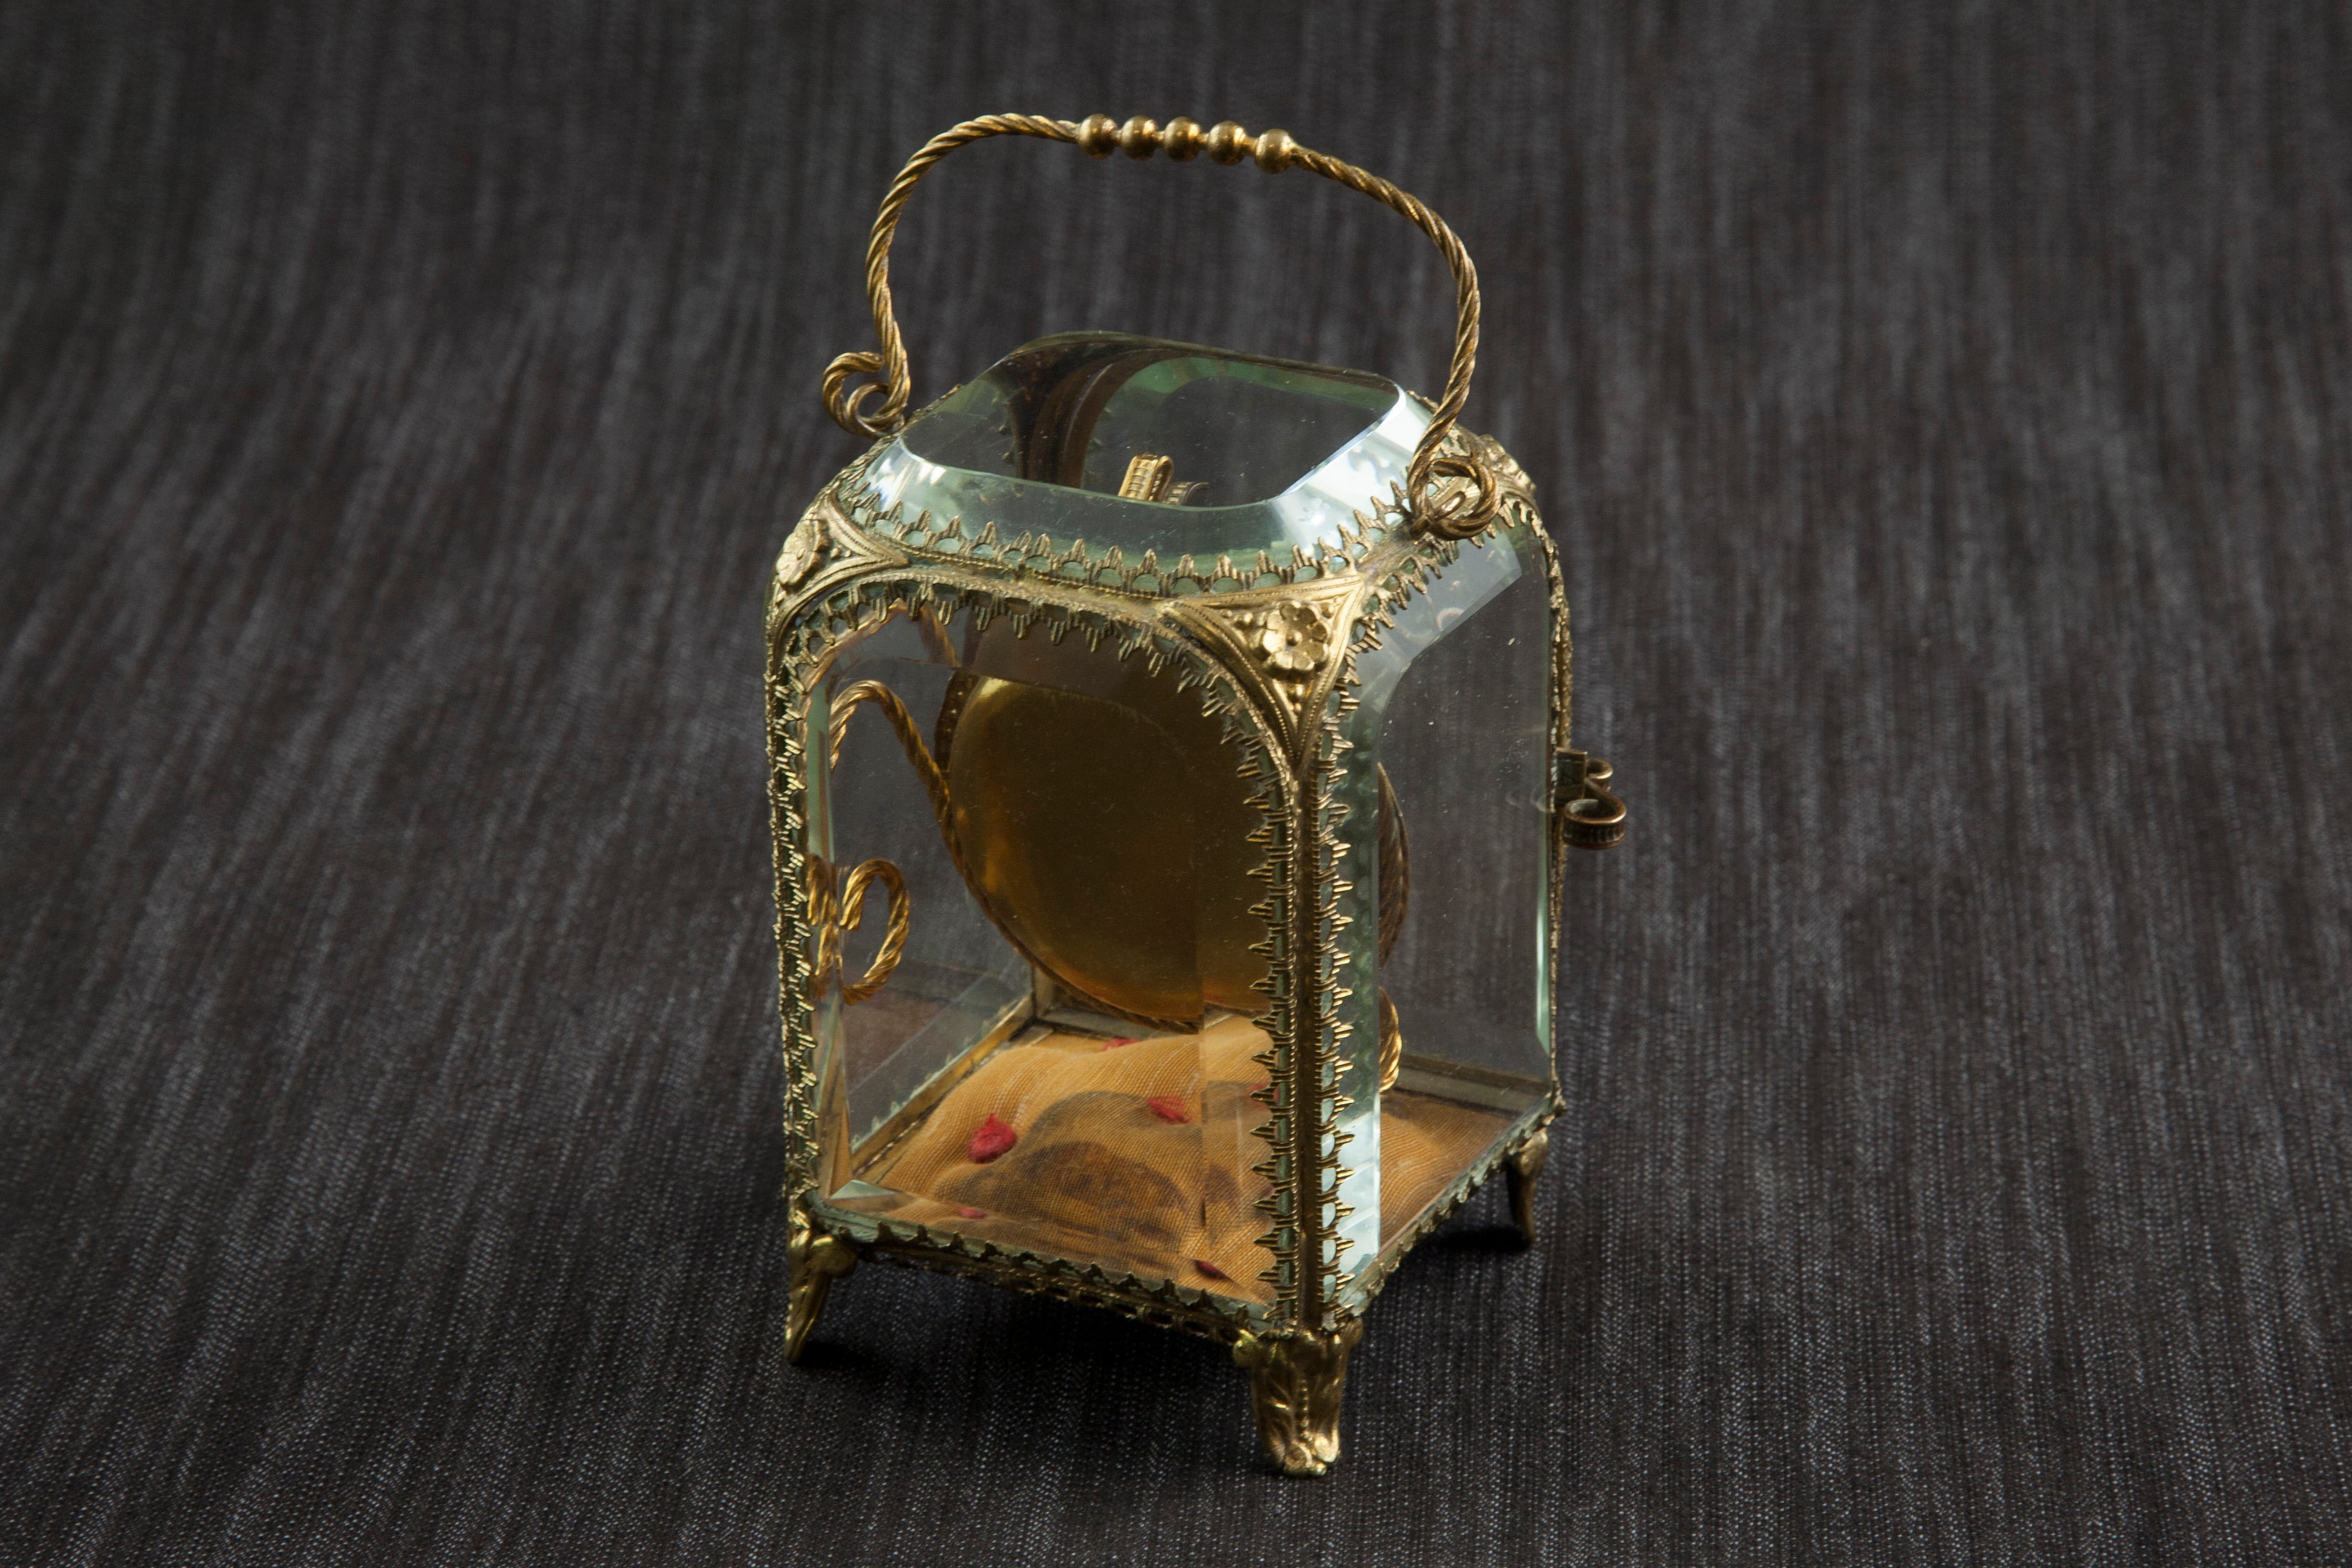 Bronze and Beveled Glass Porte-Montre or Pocket Watch Display Case